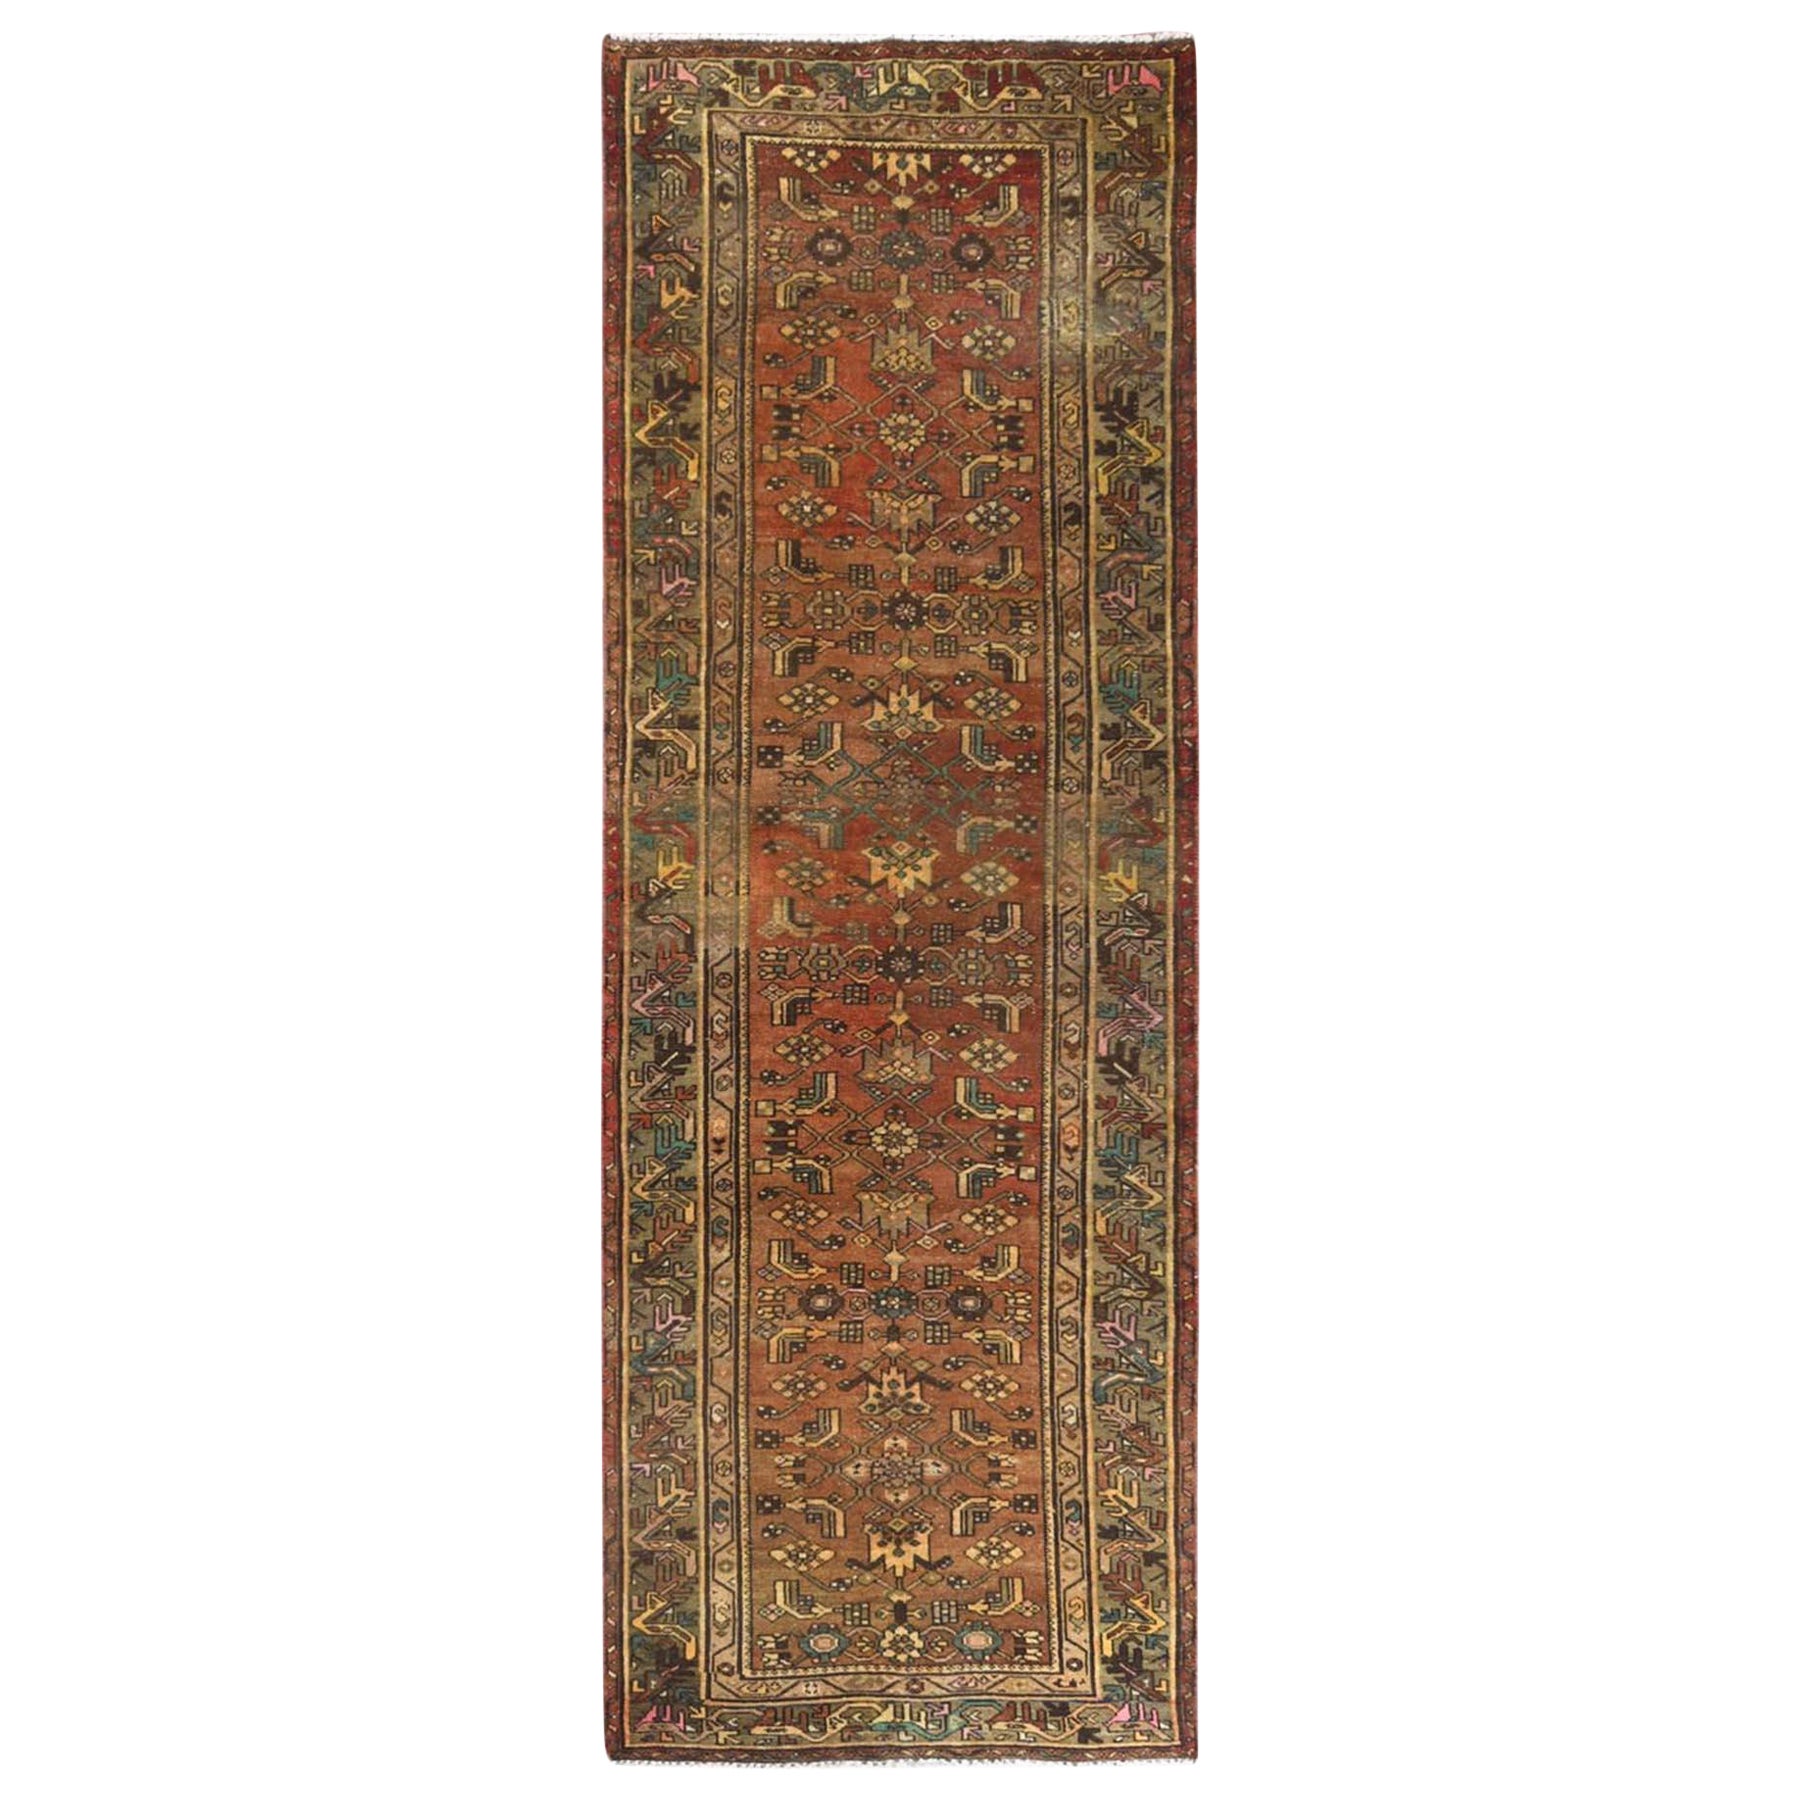 Earth Tone Colors, Vintage Persian Hamadan, Hand Knotted Worn Wool Runner Rug